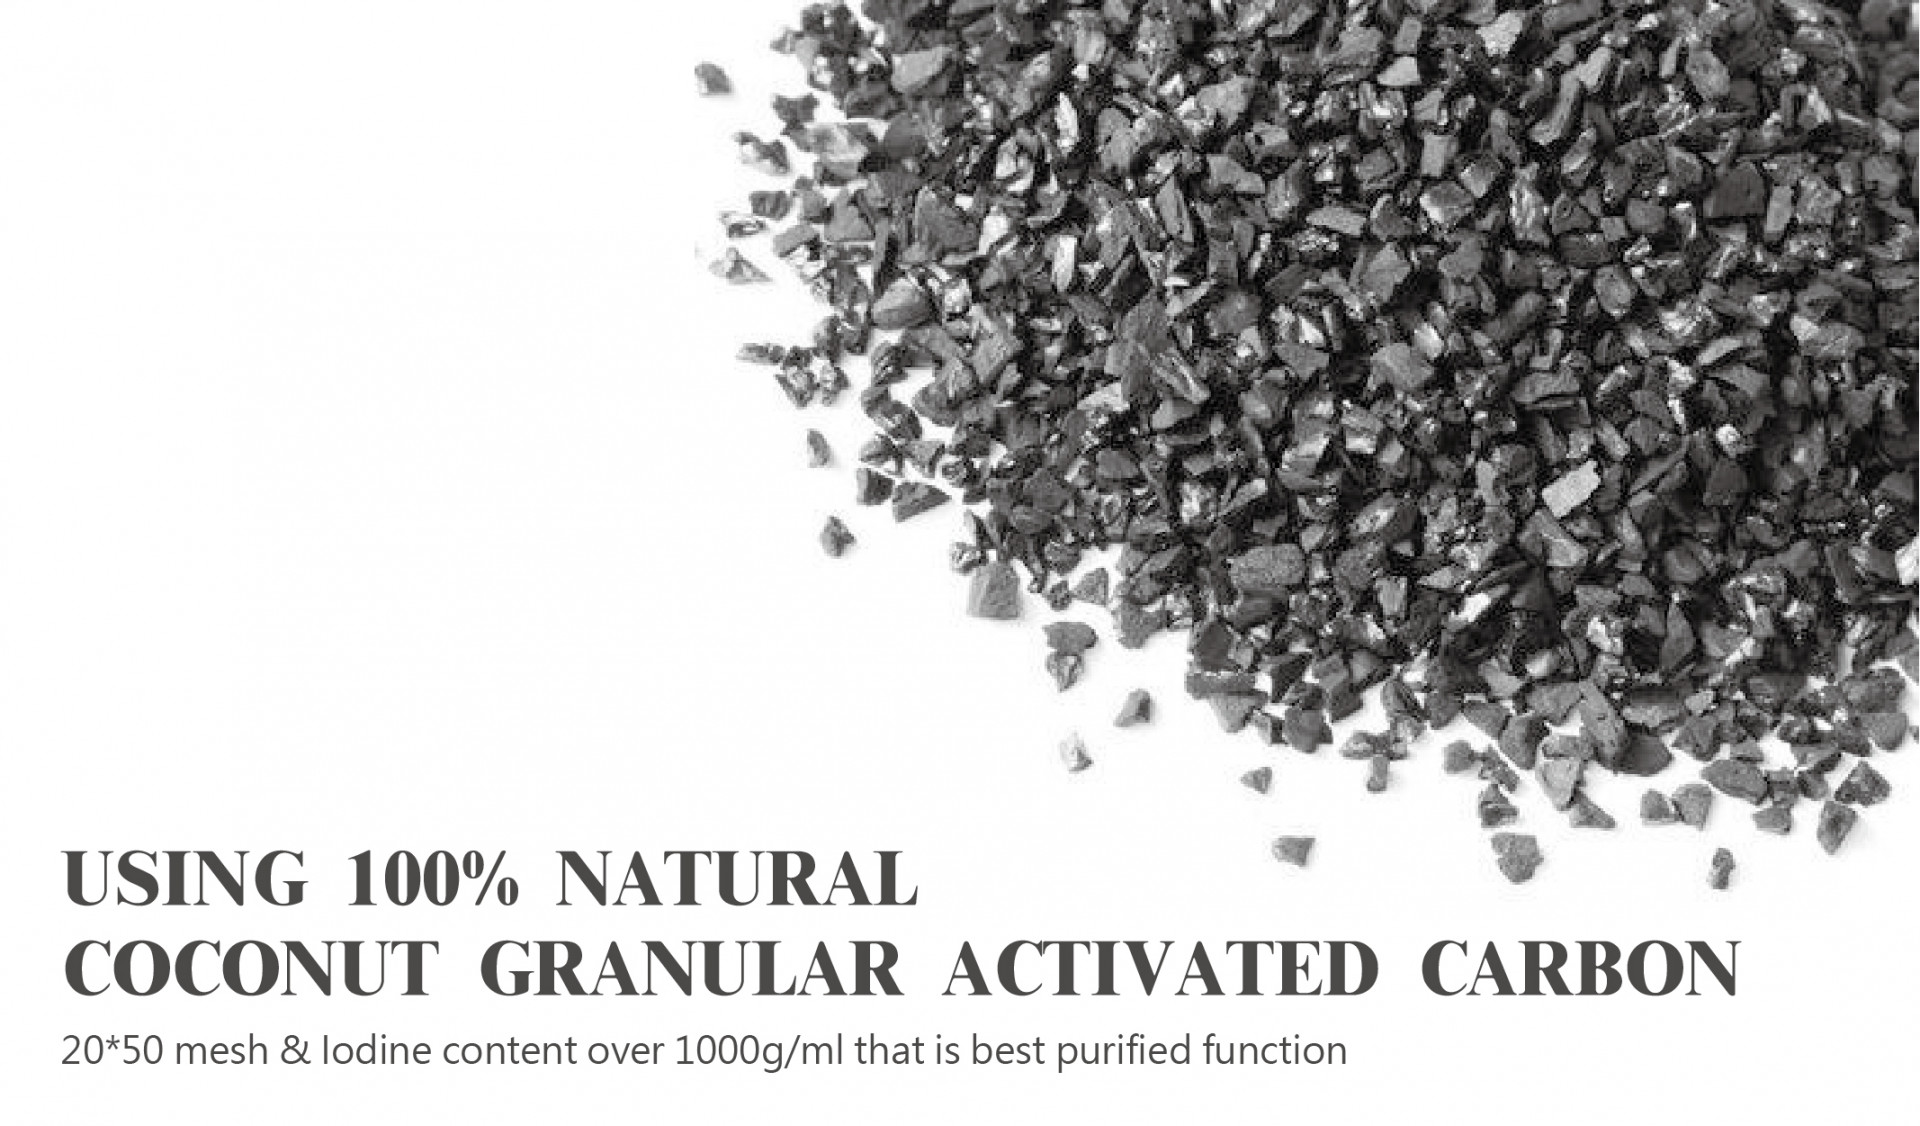 FILTER USING 100% NATURAL COCONUT GRANUL ACTIVATED CARBON